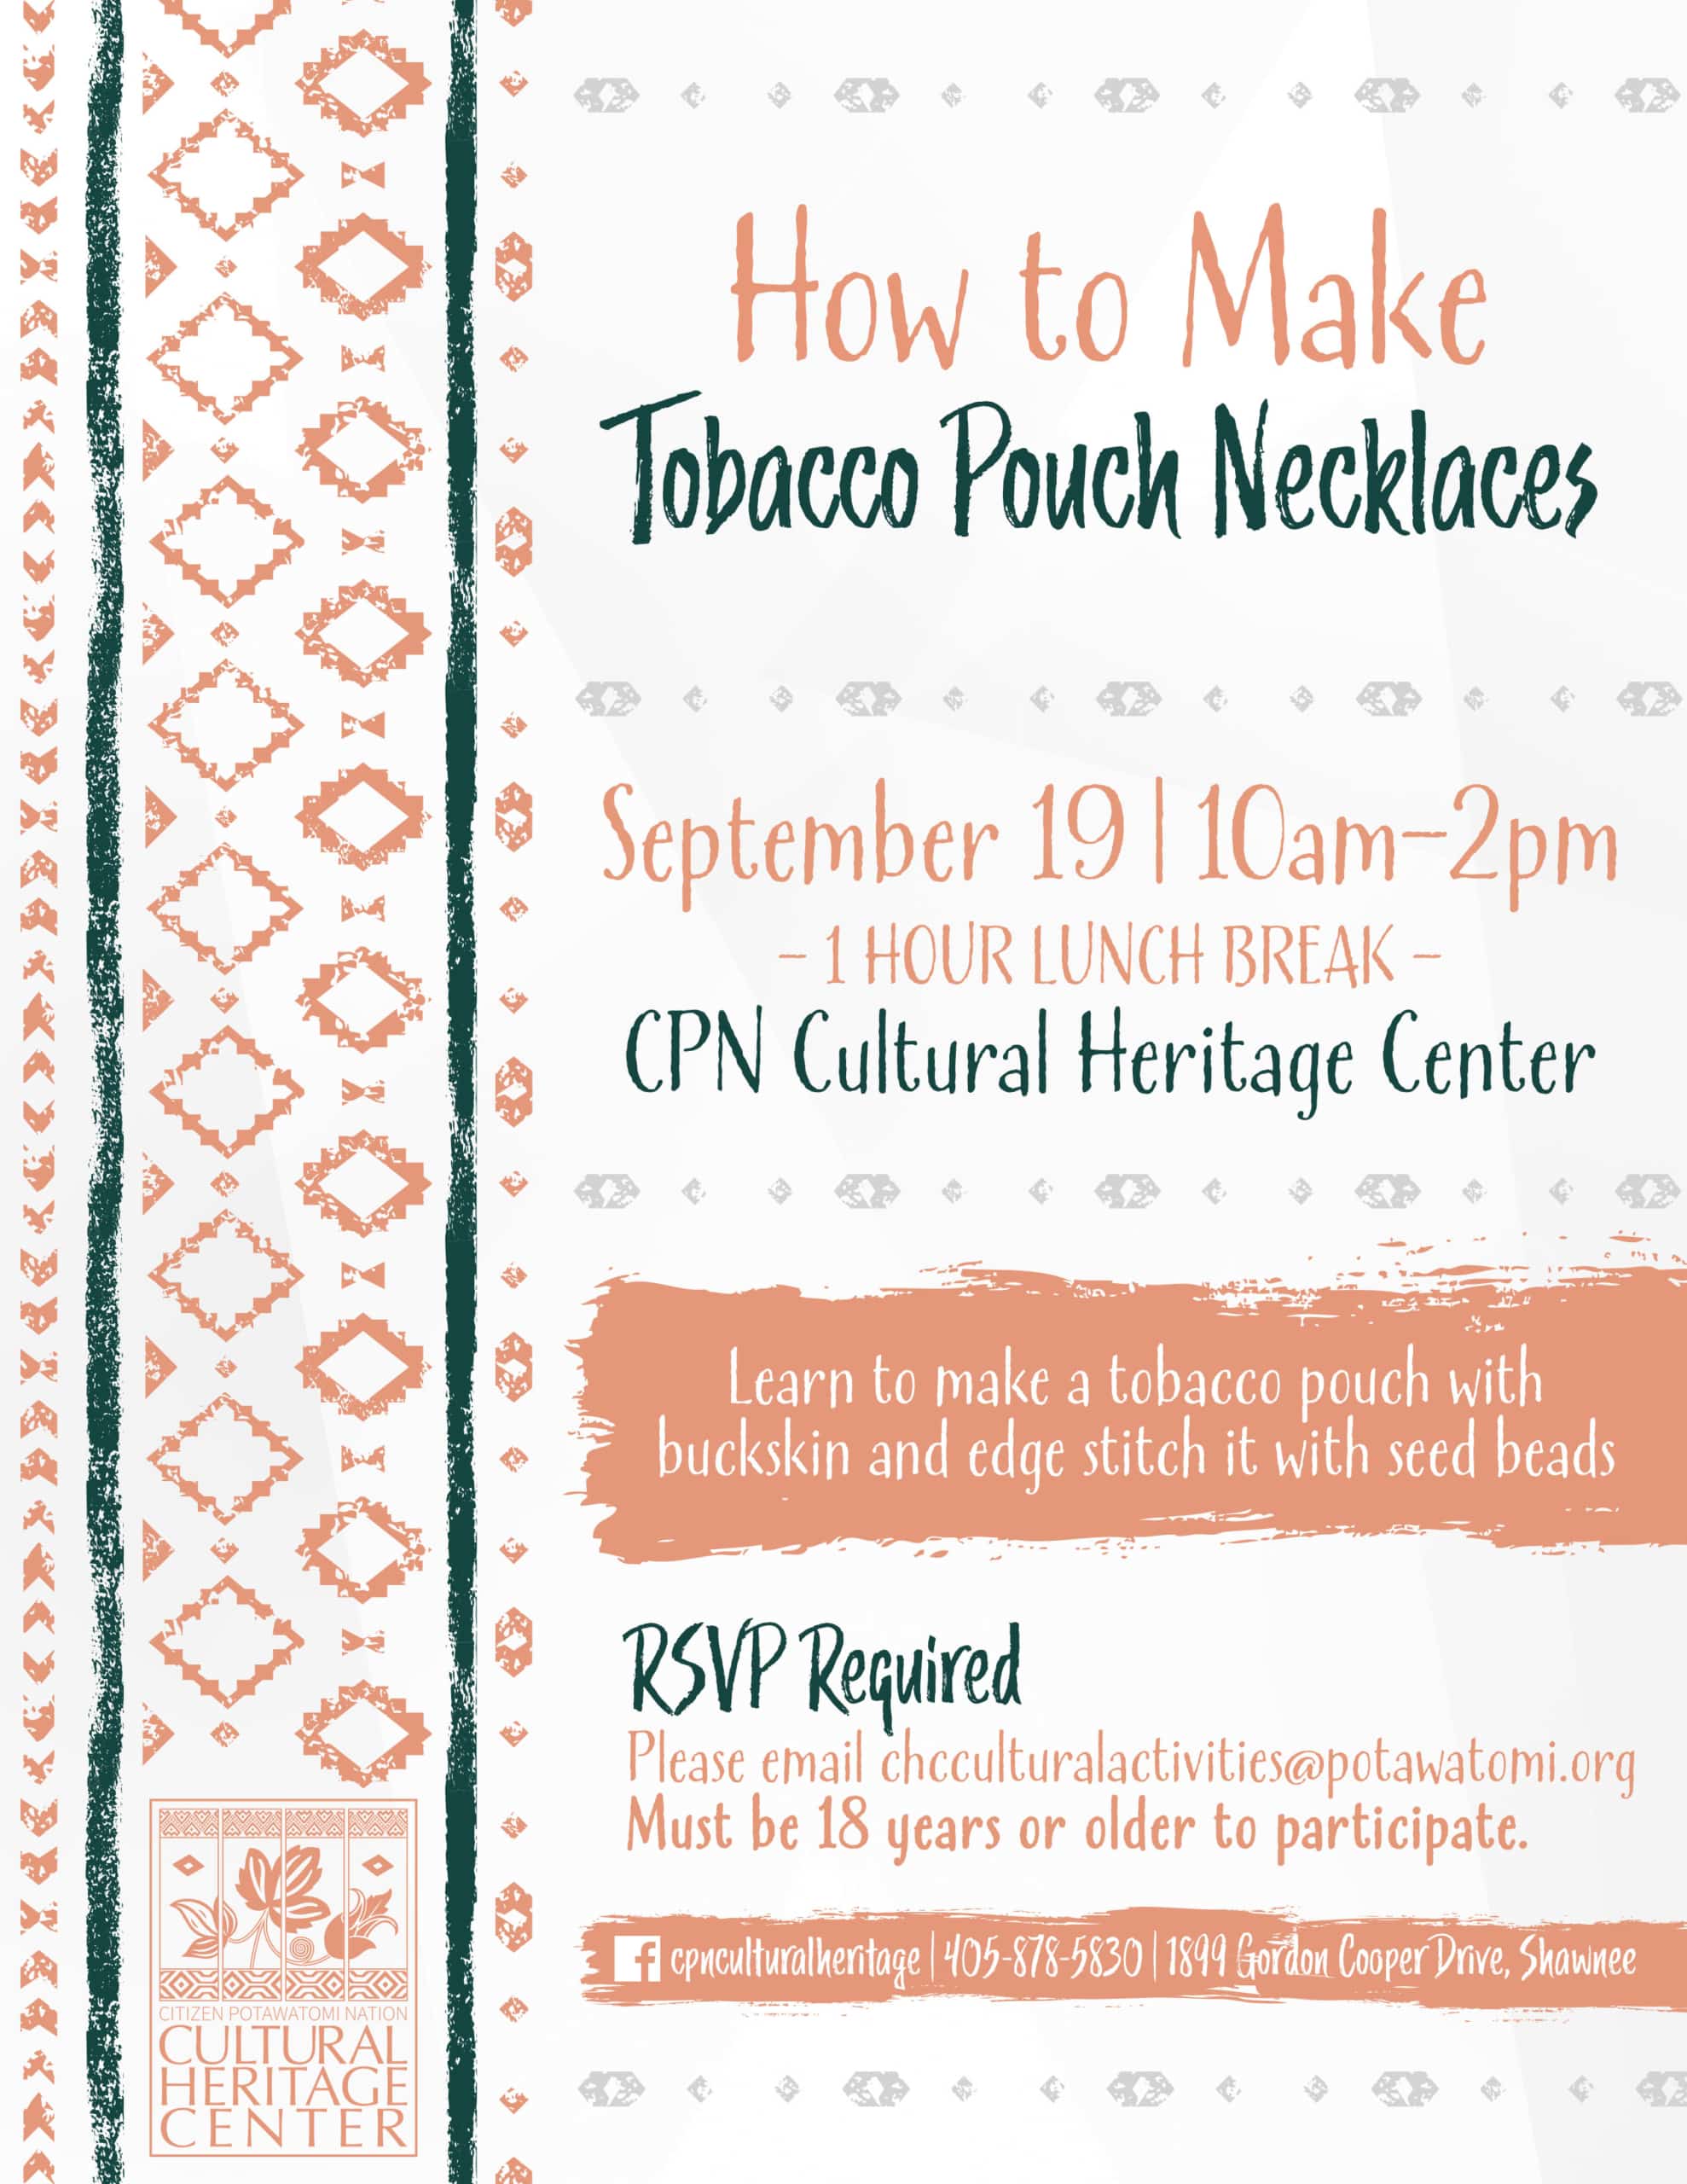 Peach and green geometric patterns frame event details for the September 19 class on how to make tobacco pouch necklaces at the Cultural Heritage Center.